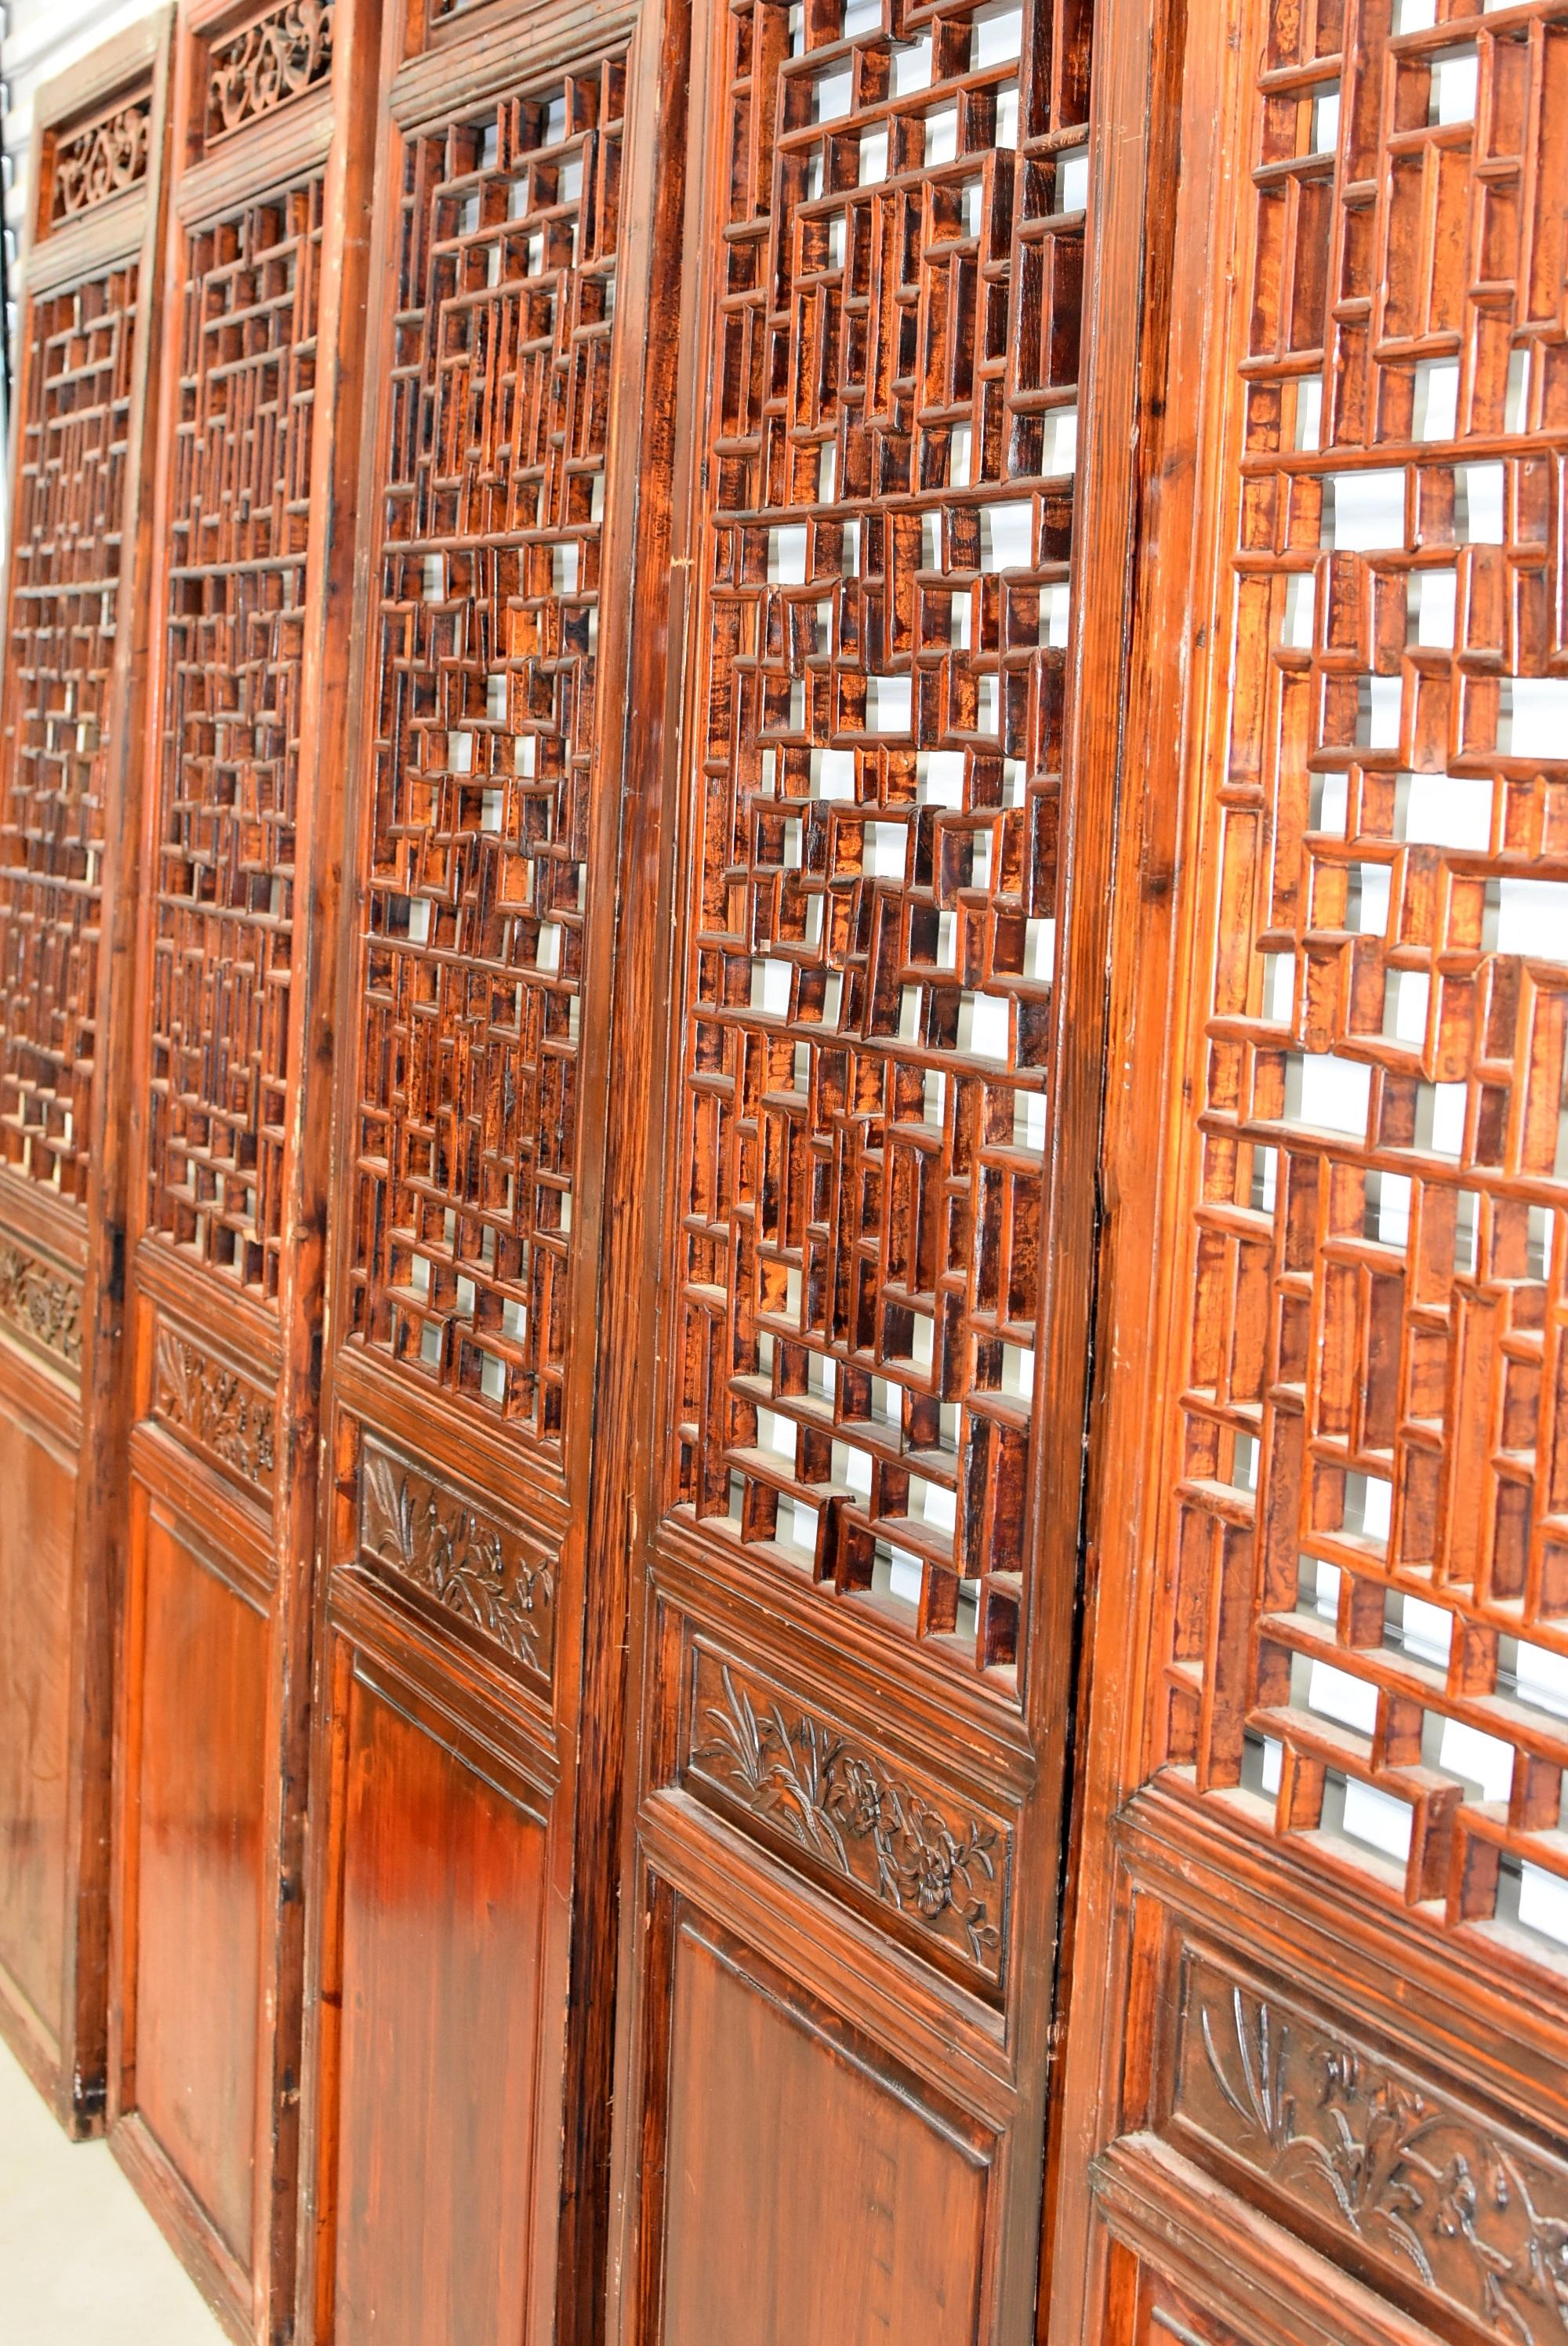 A set of beautiful Chinese antique screens in natural finish. Each of the five screens has a middle section featuring a different flower, symbolizing changing of seasons. The main openwork was created using the painstaking joinery method. Every